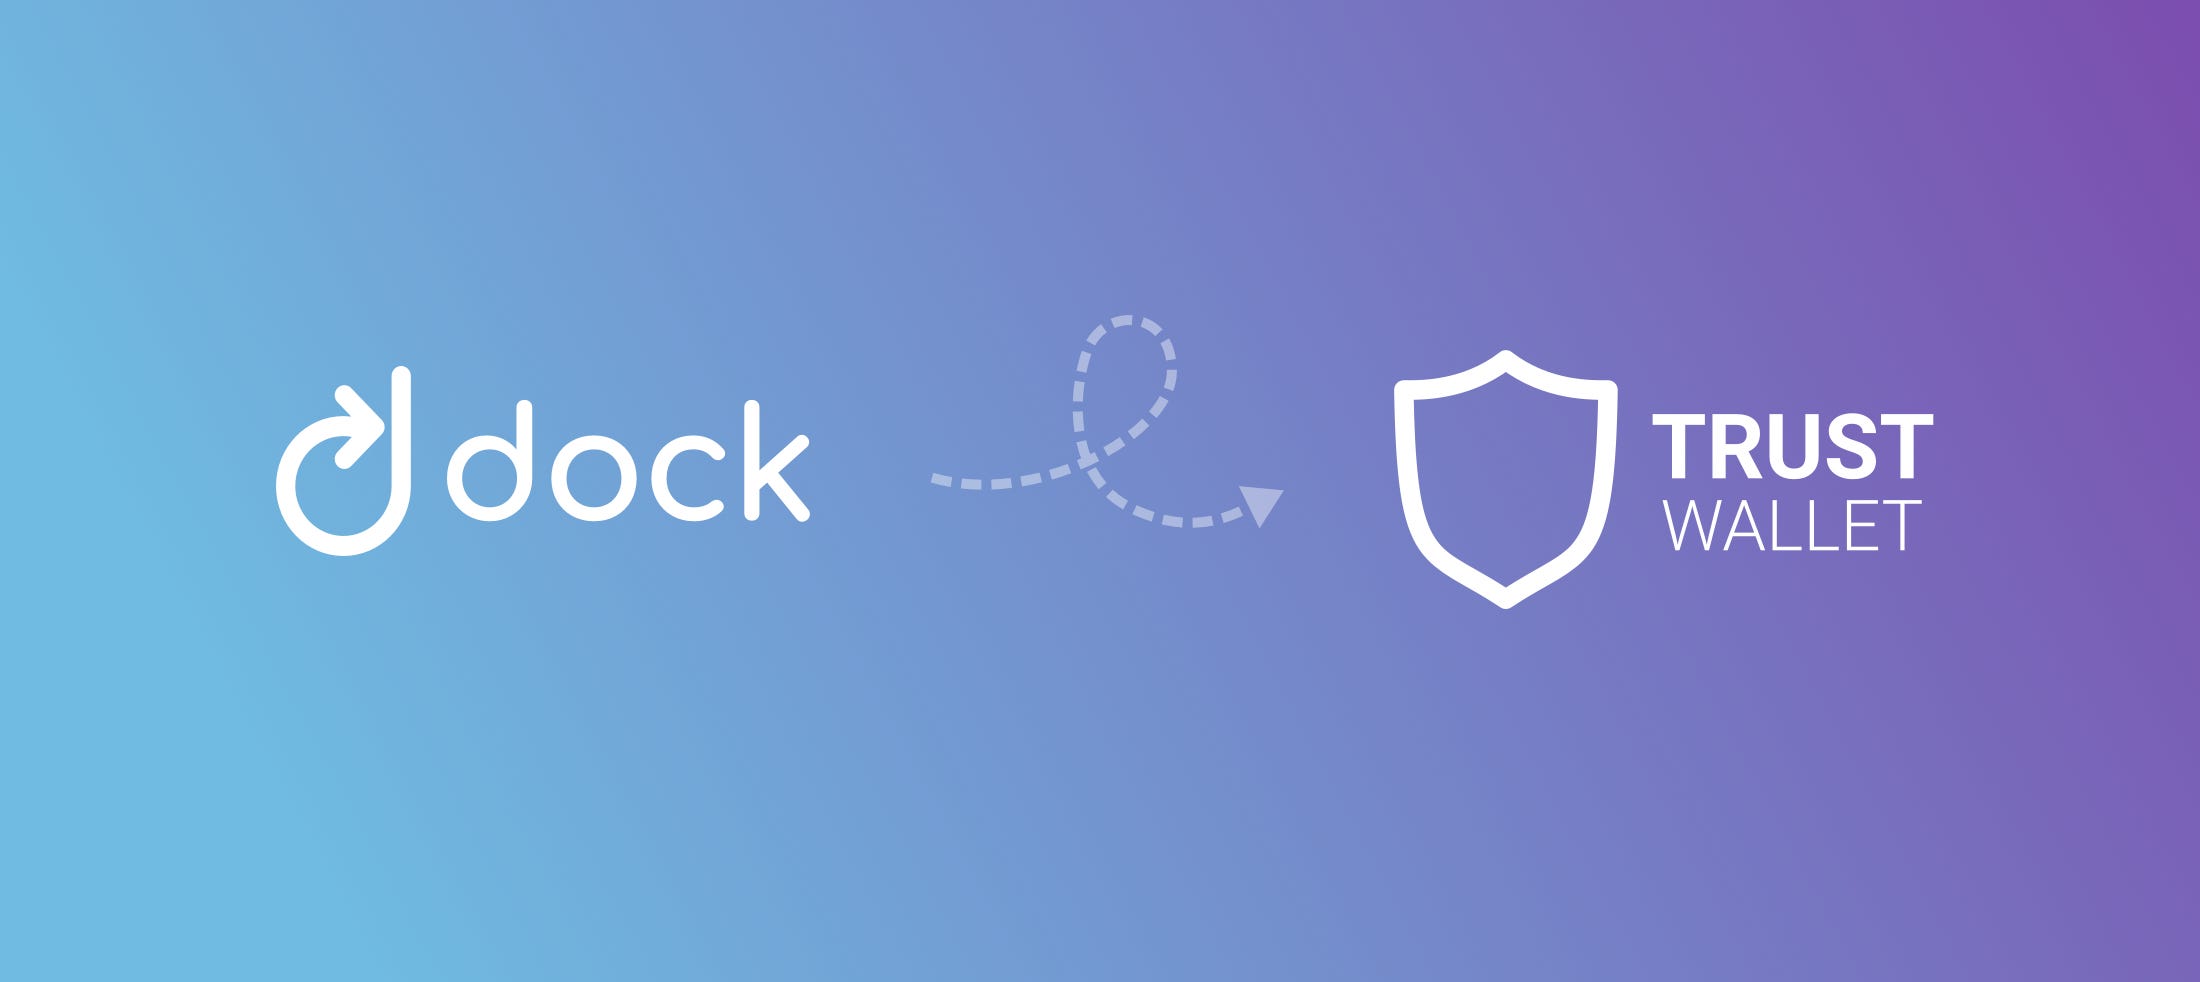 Trust Wallet Now Supports Dock. Today we’re thrilled to ...